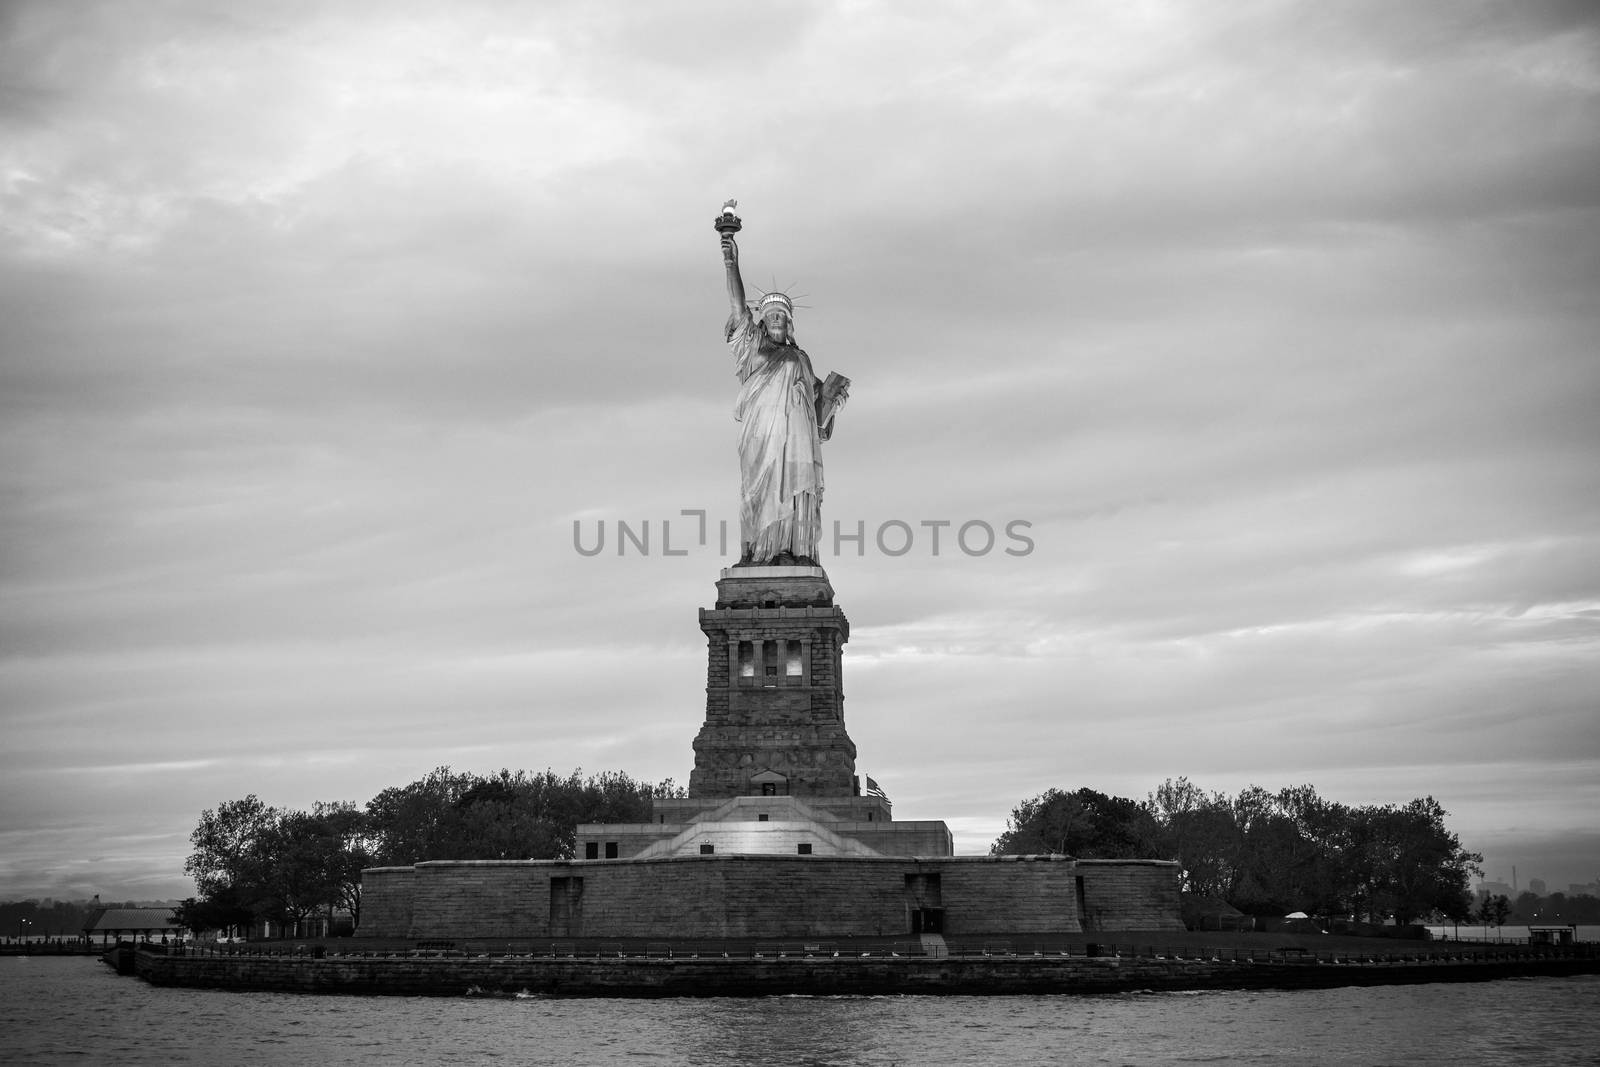 Statue of Liberty at dusk, New York City, USA. Black and white image.